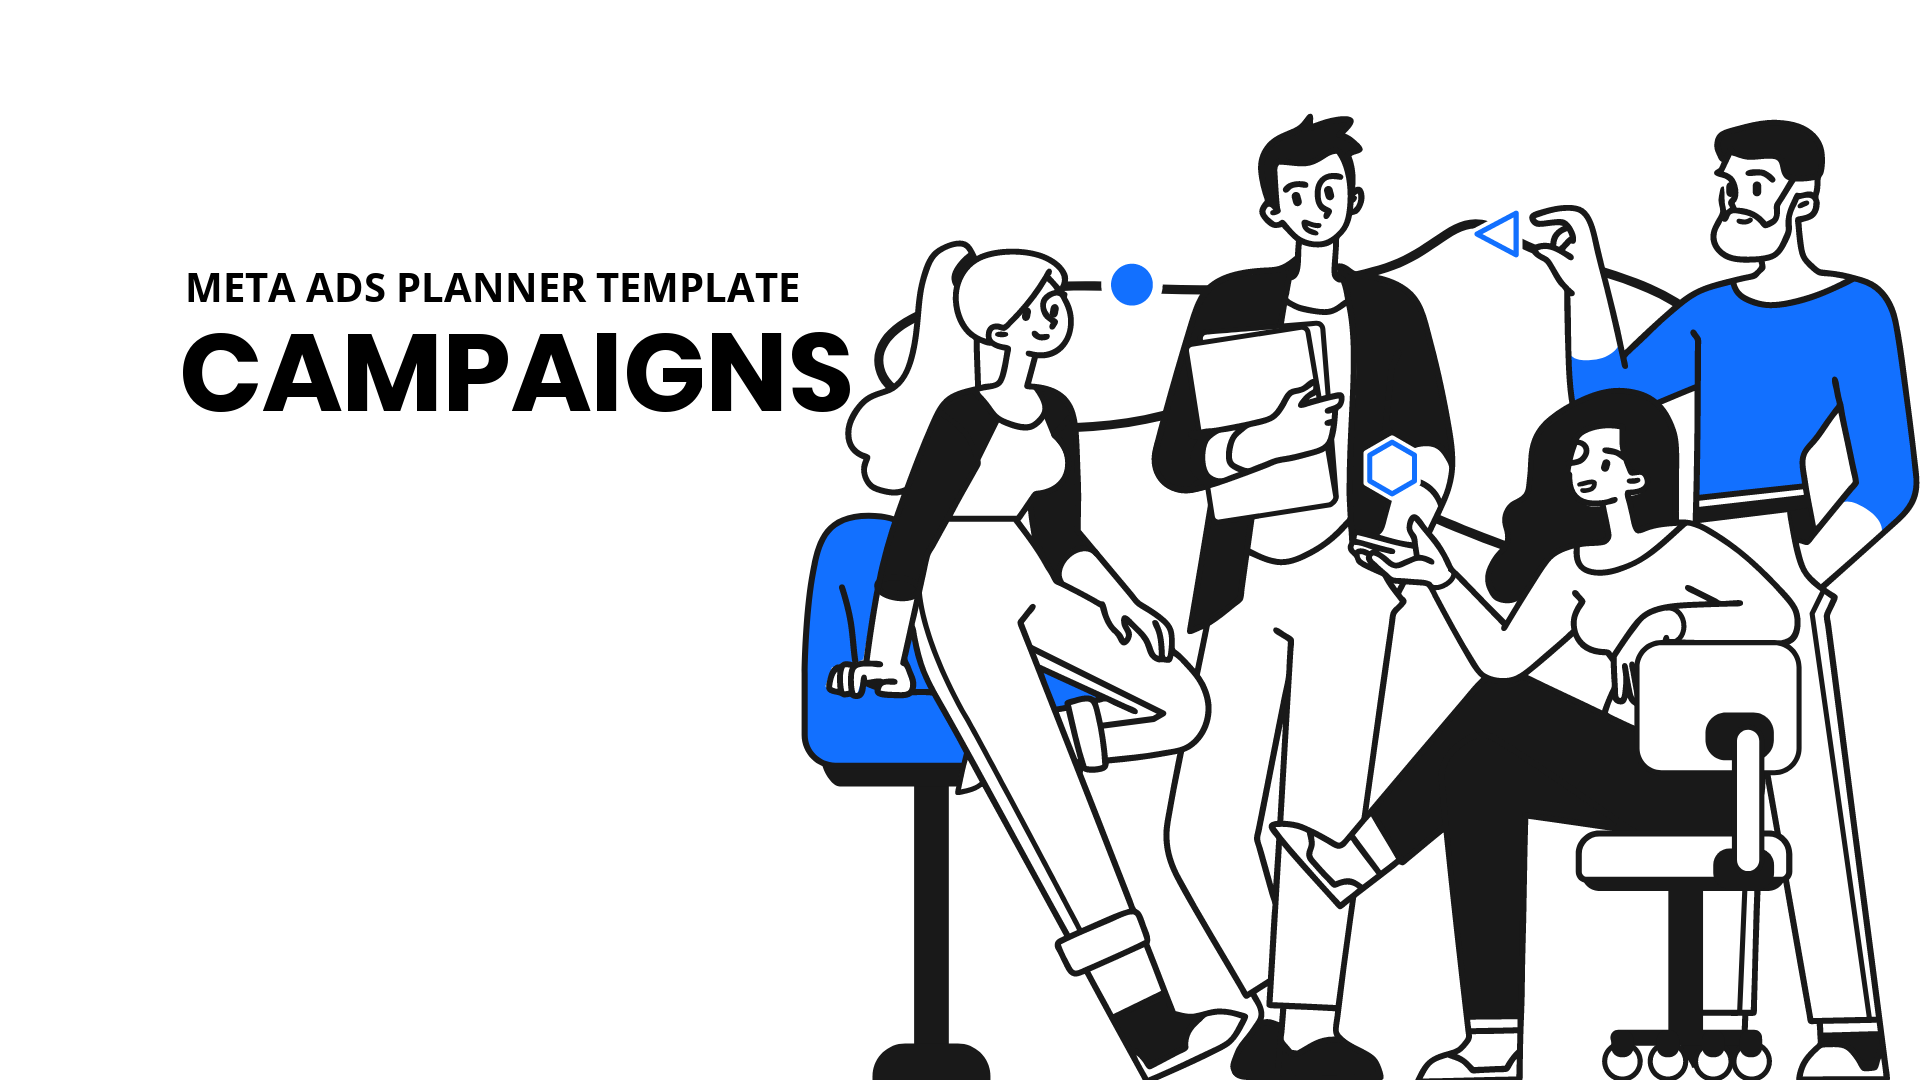 meta ads planner template - campaigns